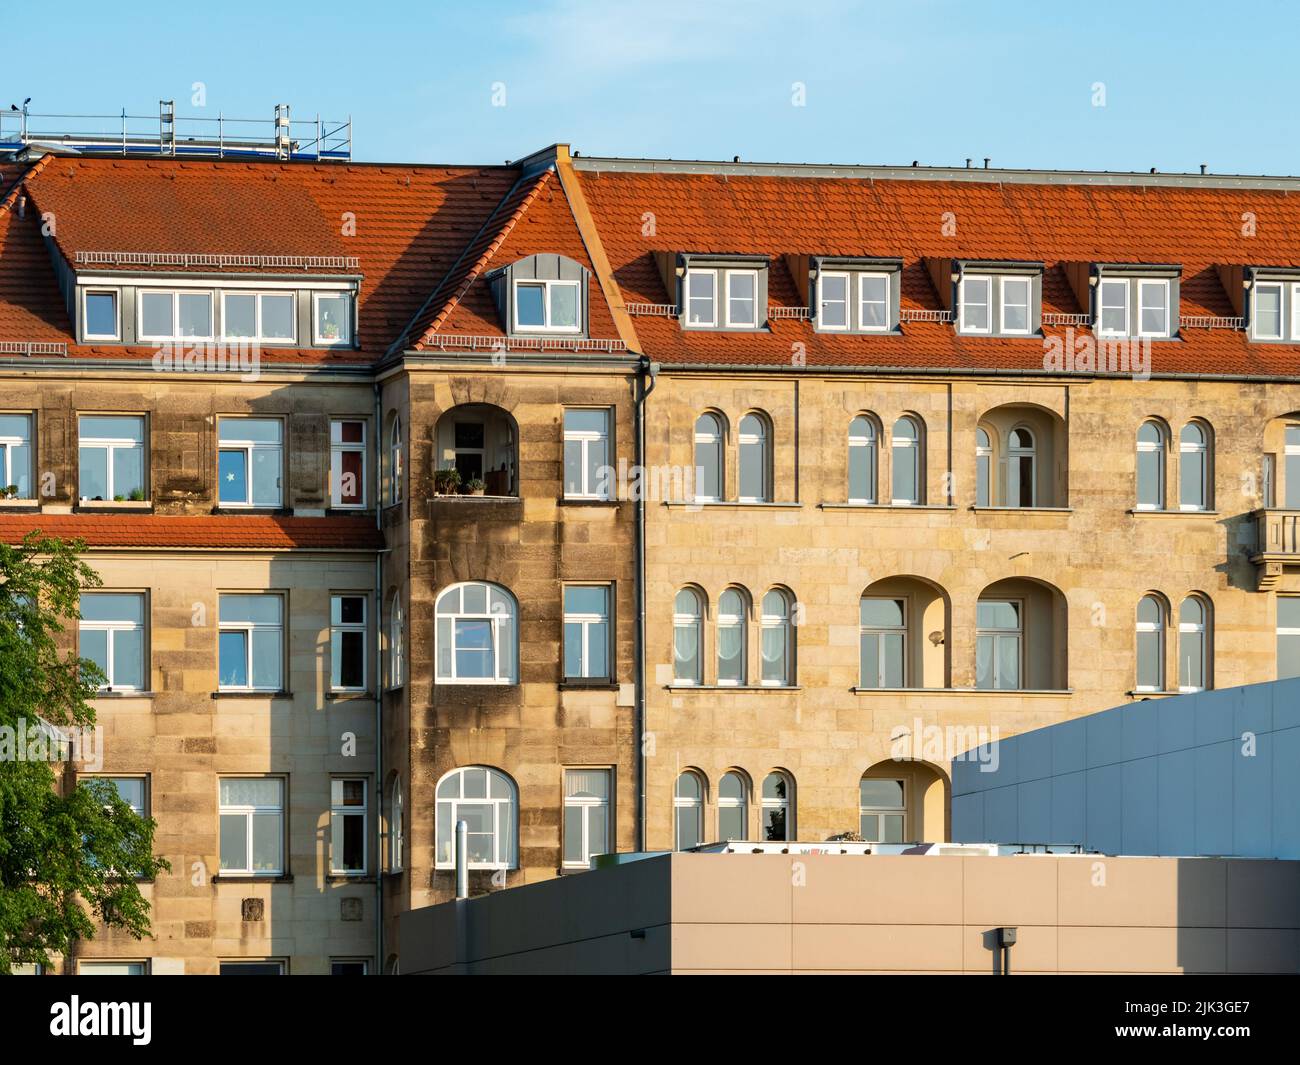 Big old house with a sandstone facade in the city. Red tiled rooftop in good condition. Architecture in Saxony. Residential building exterior. Stock Photo